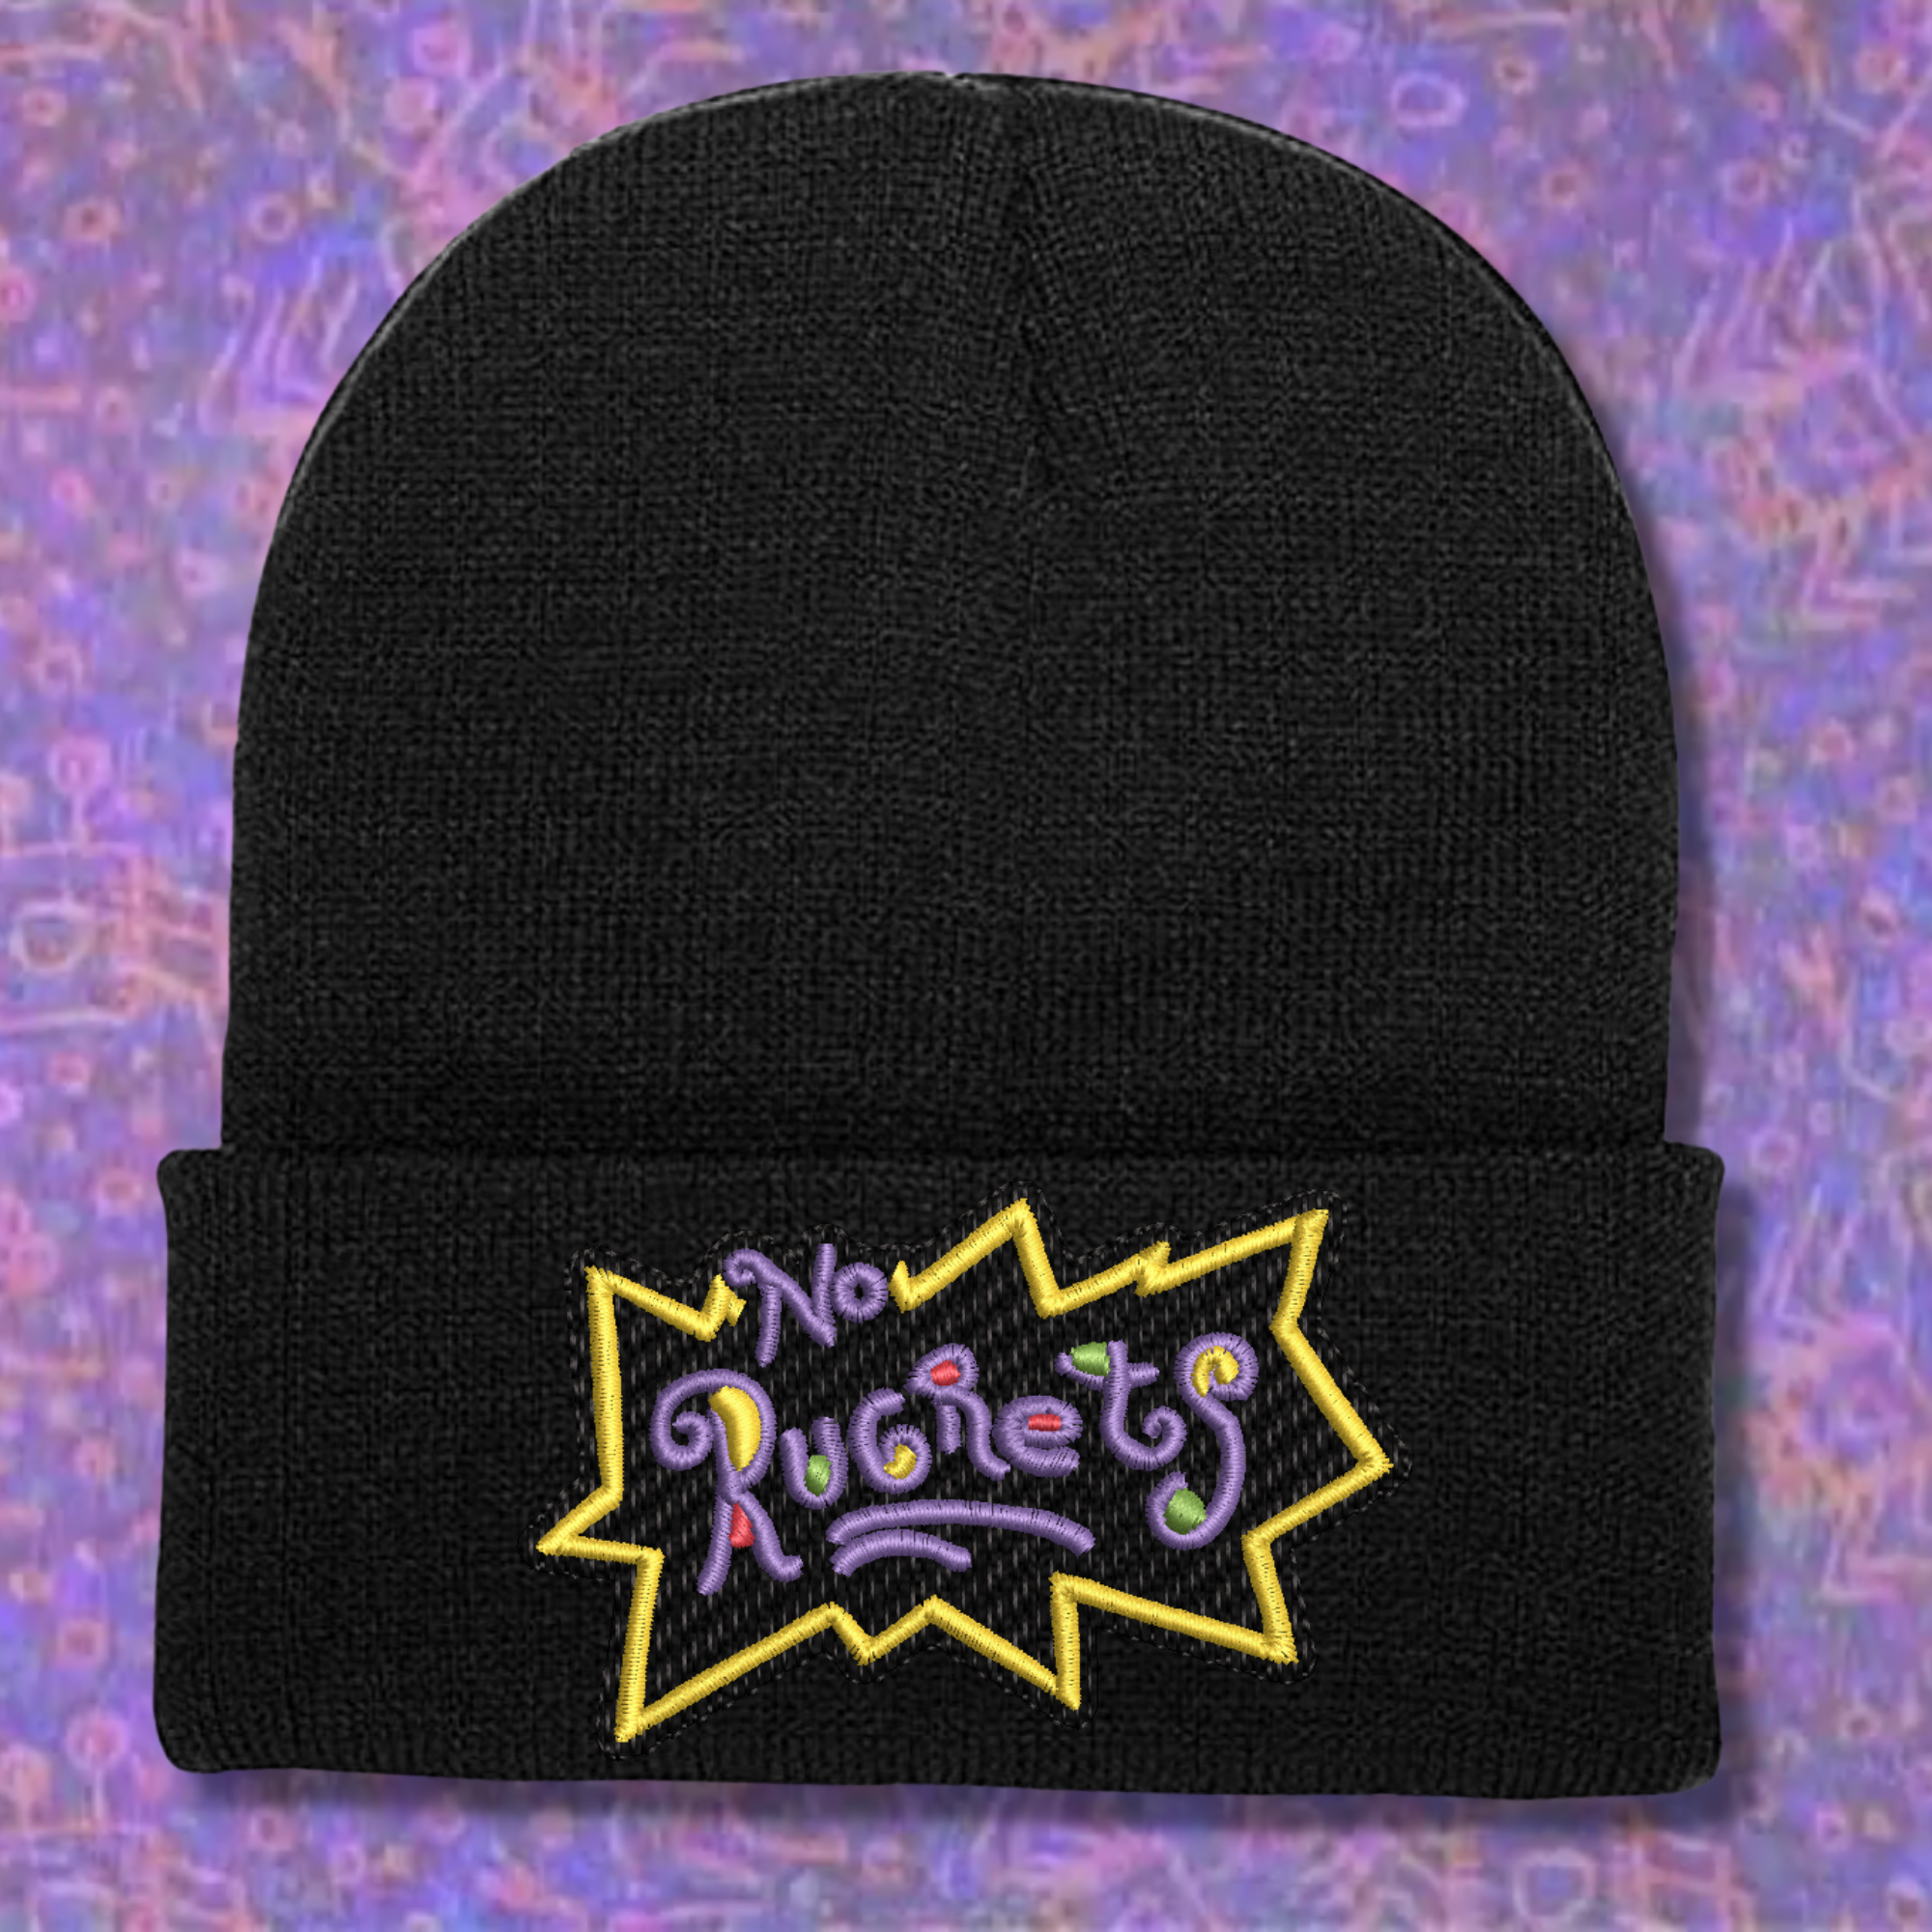 No Rugrets Rugrats Parody Embroidered Beanie Hat, One Size Fits All